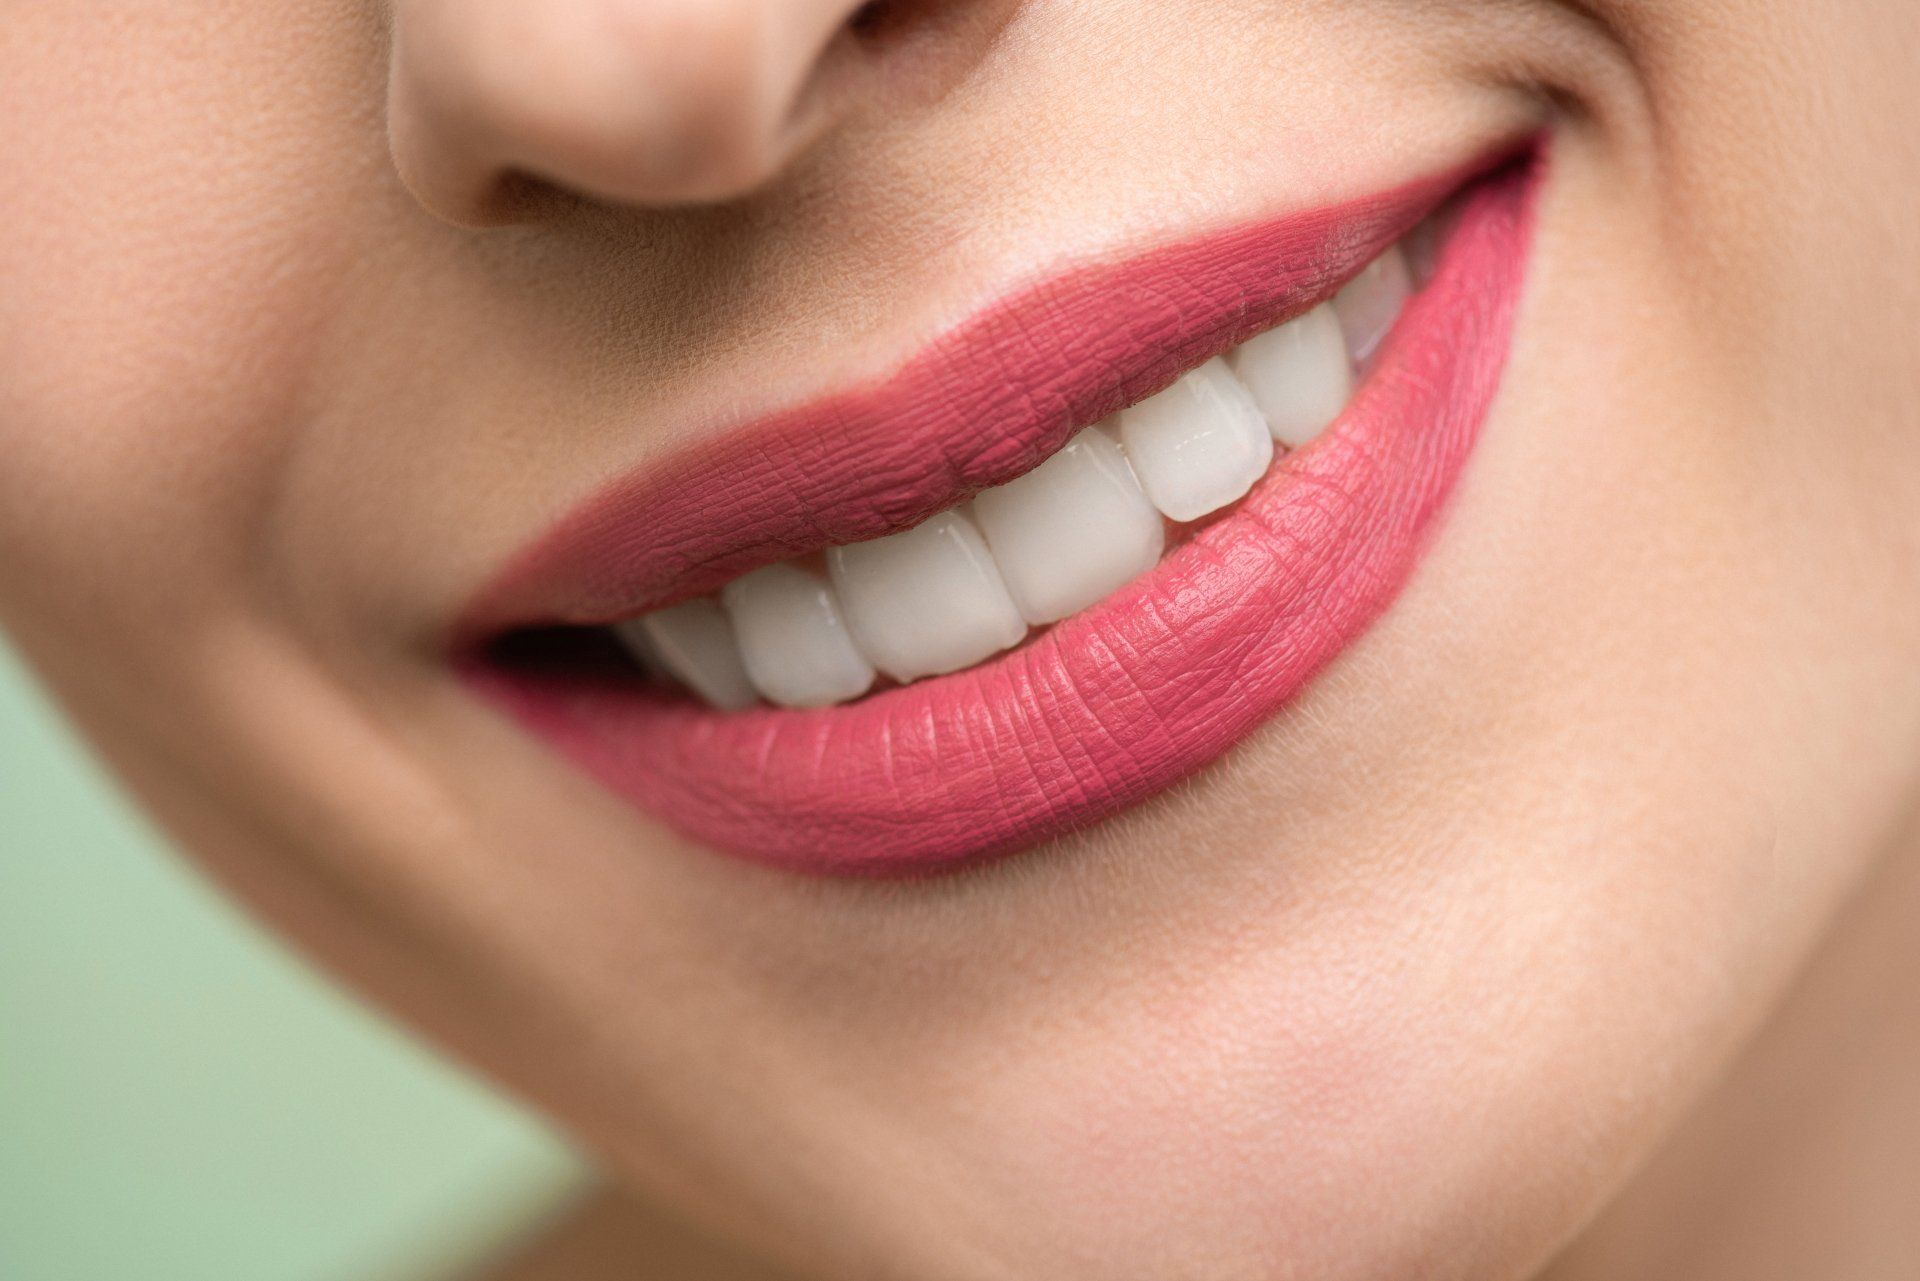 lady smiling with white teeth
